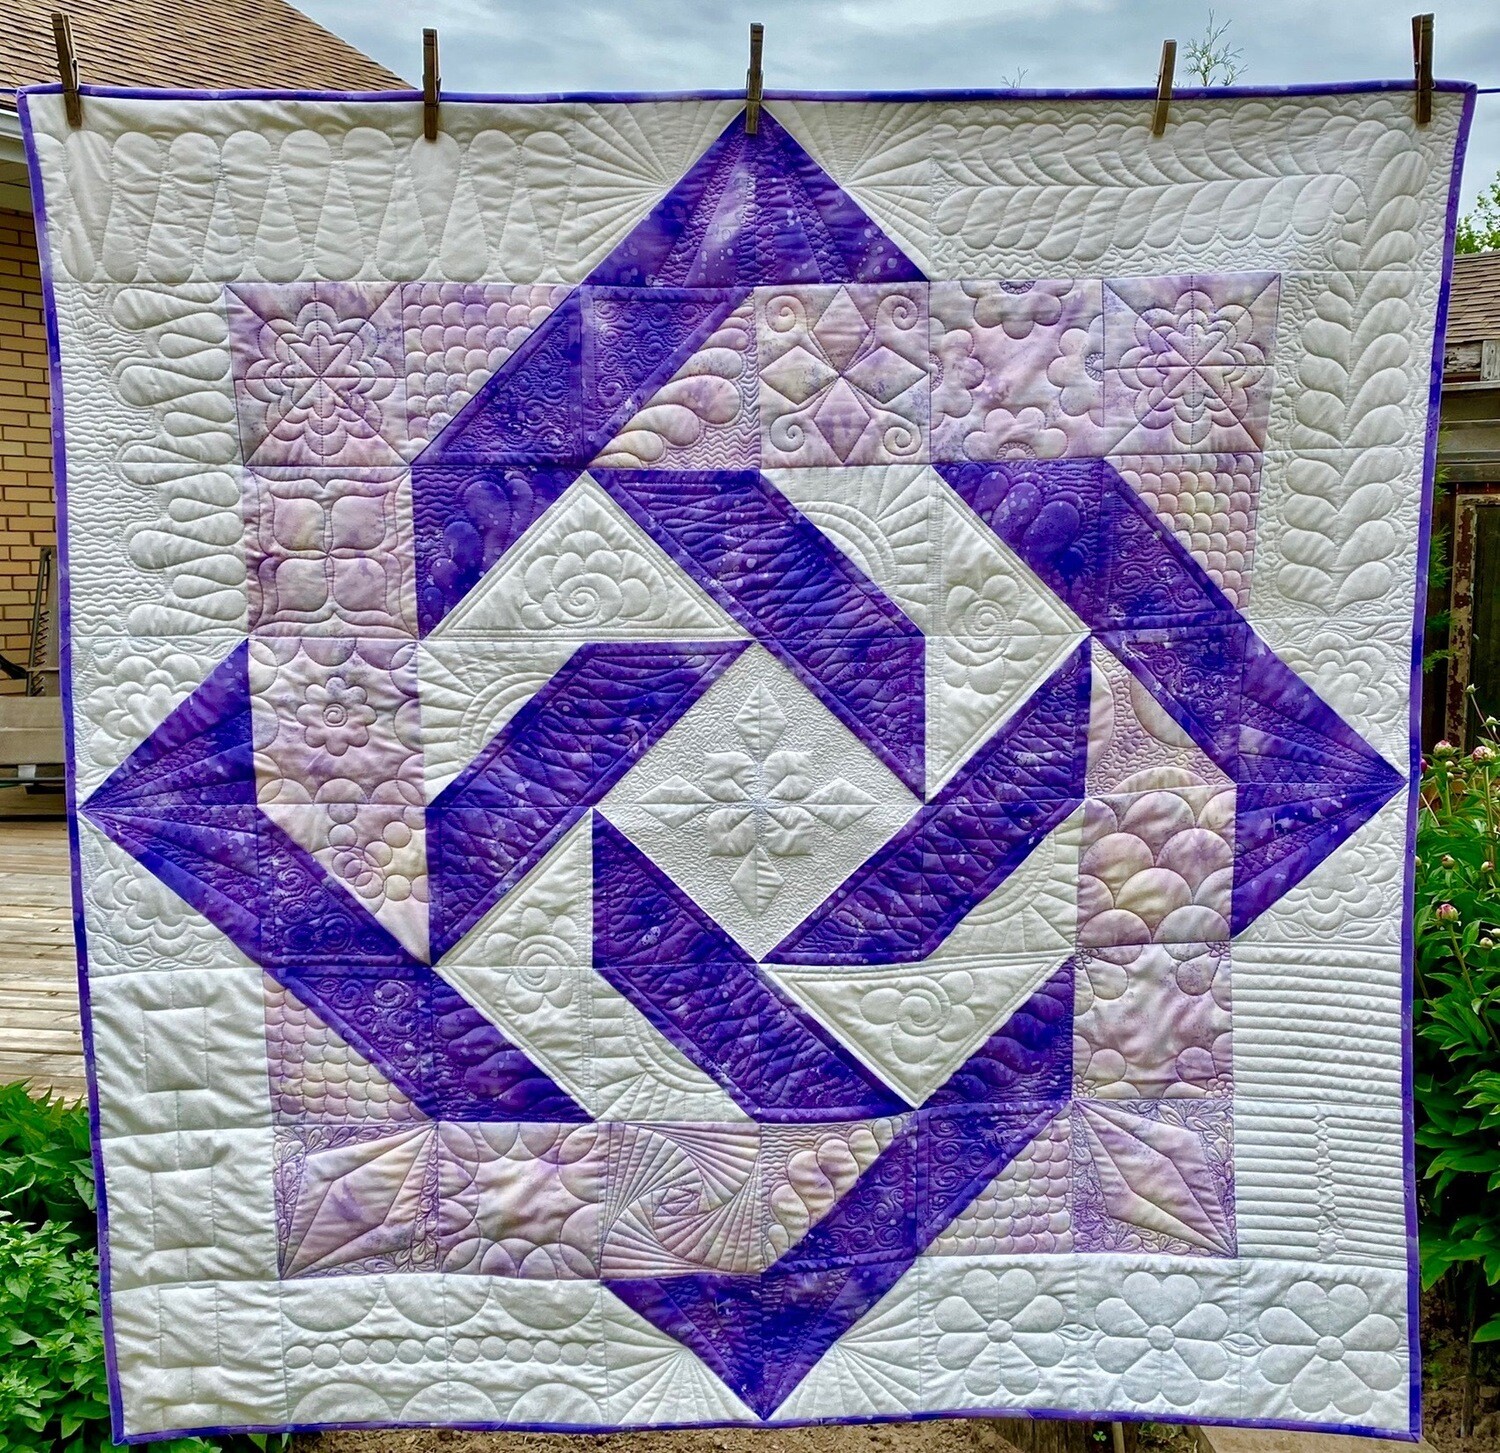 ​INTERLOCKED- RULER QUILTING WITH LONG ARM MACHINES
Monday November 13th, 10:30 am - 4:30 pm
$100.00 +HST